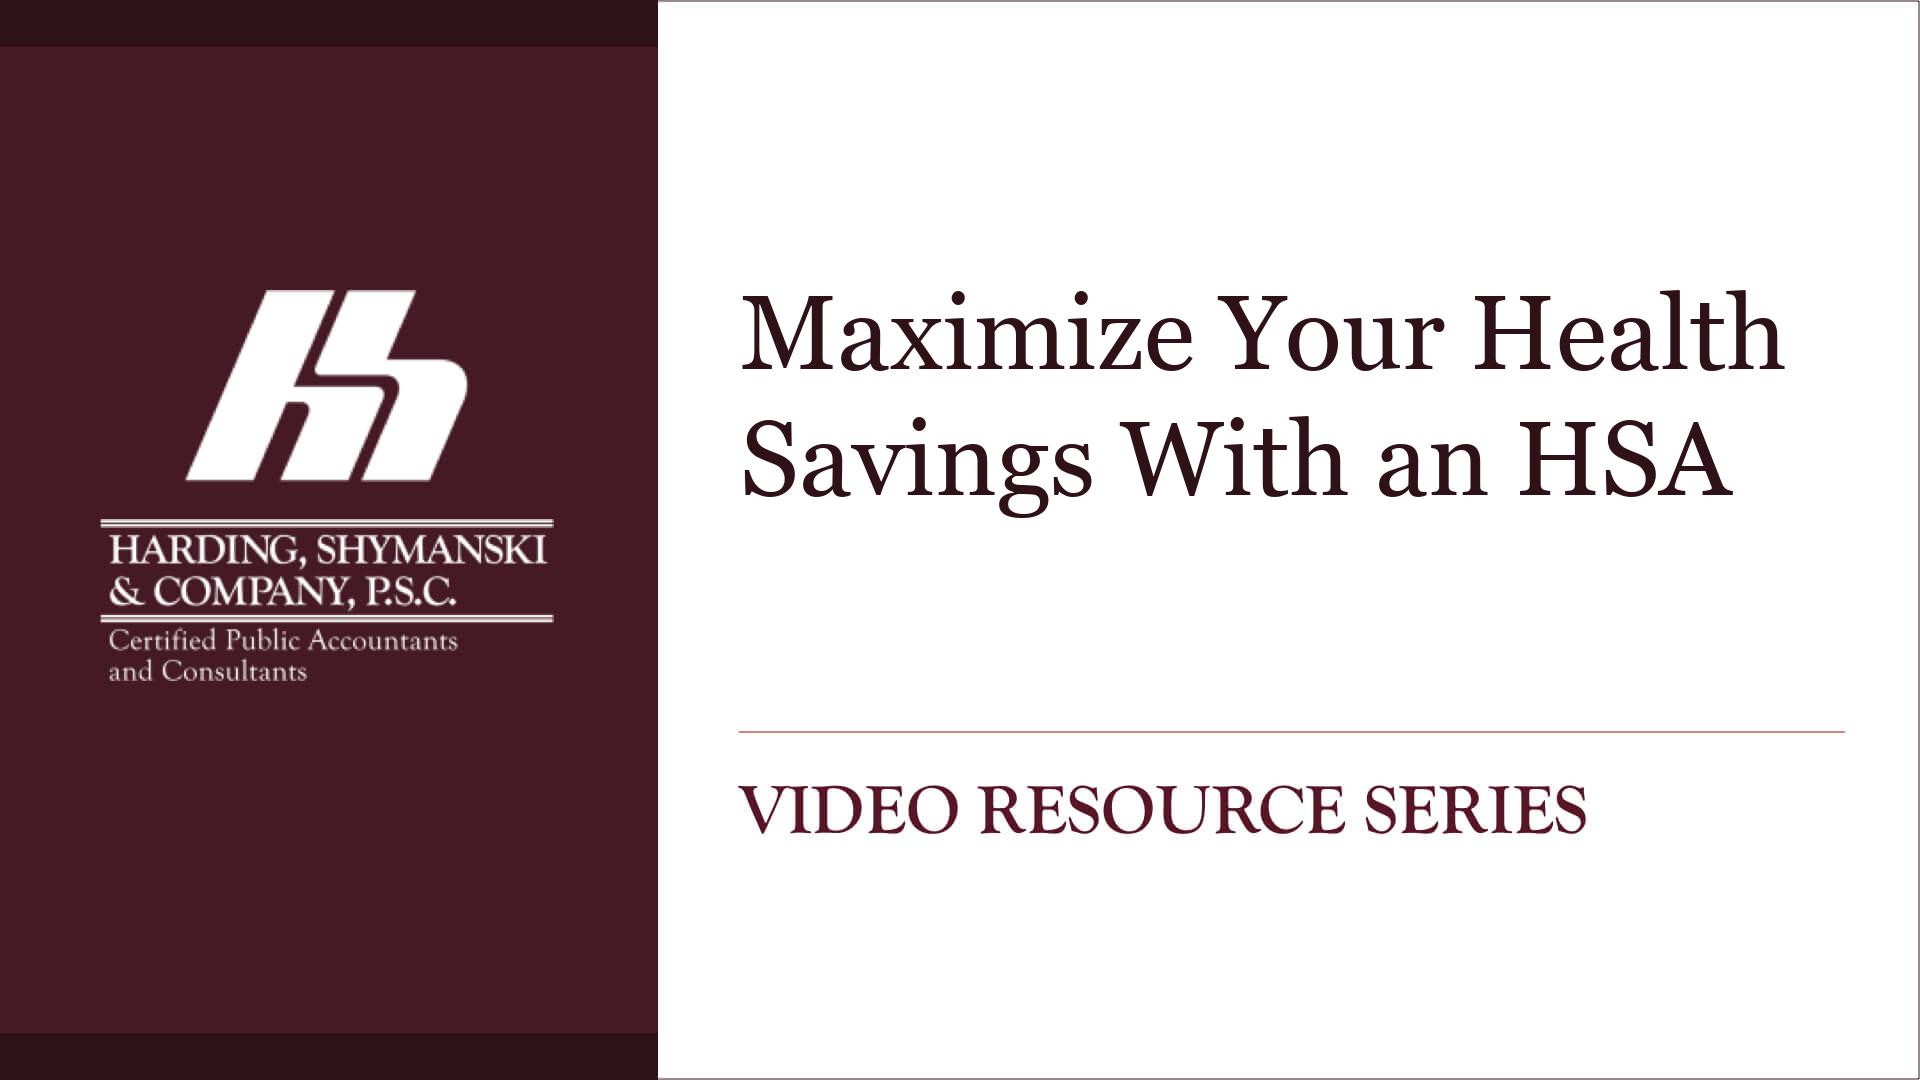 Maximize Your Health Savings With an HSA